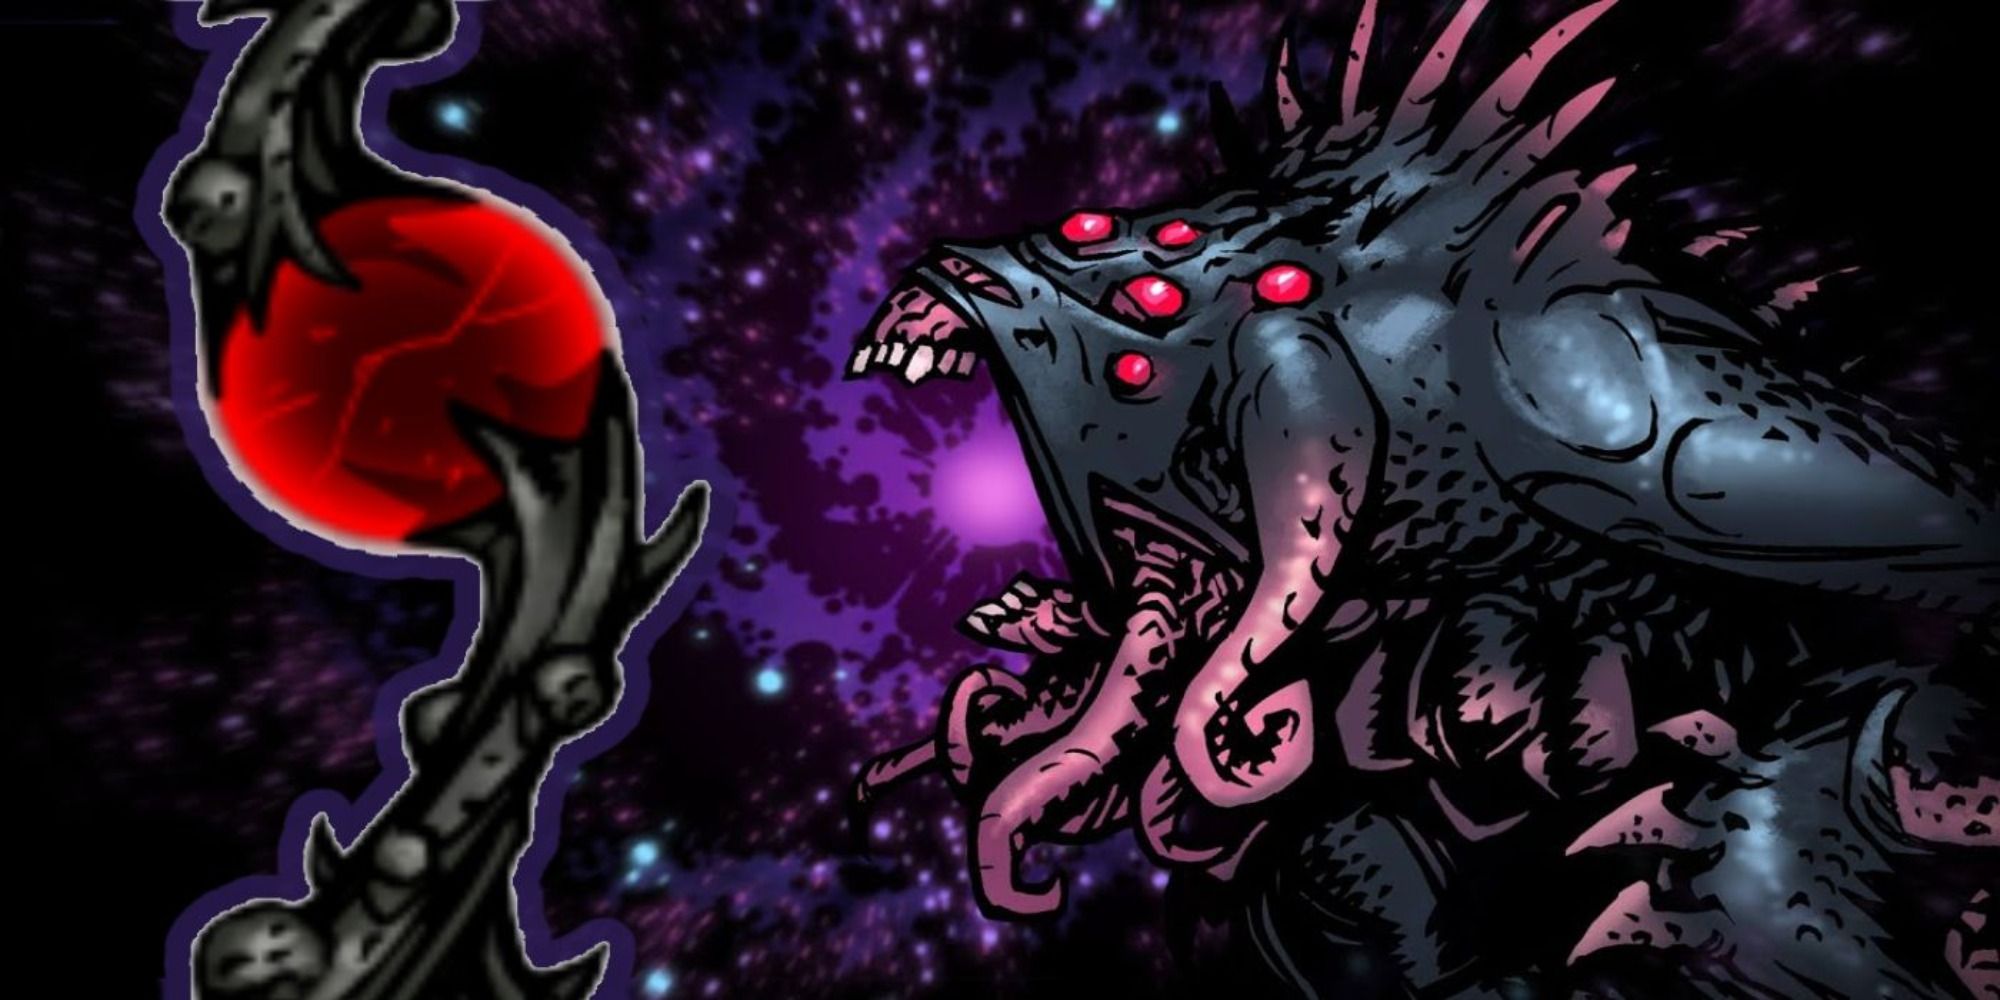 A Shambler is screaming in outer space.